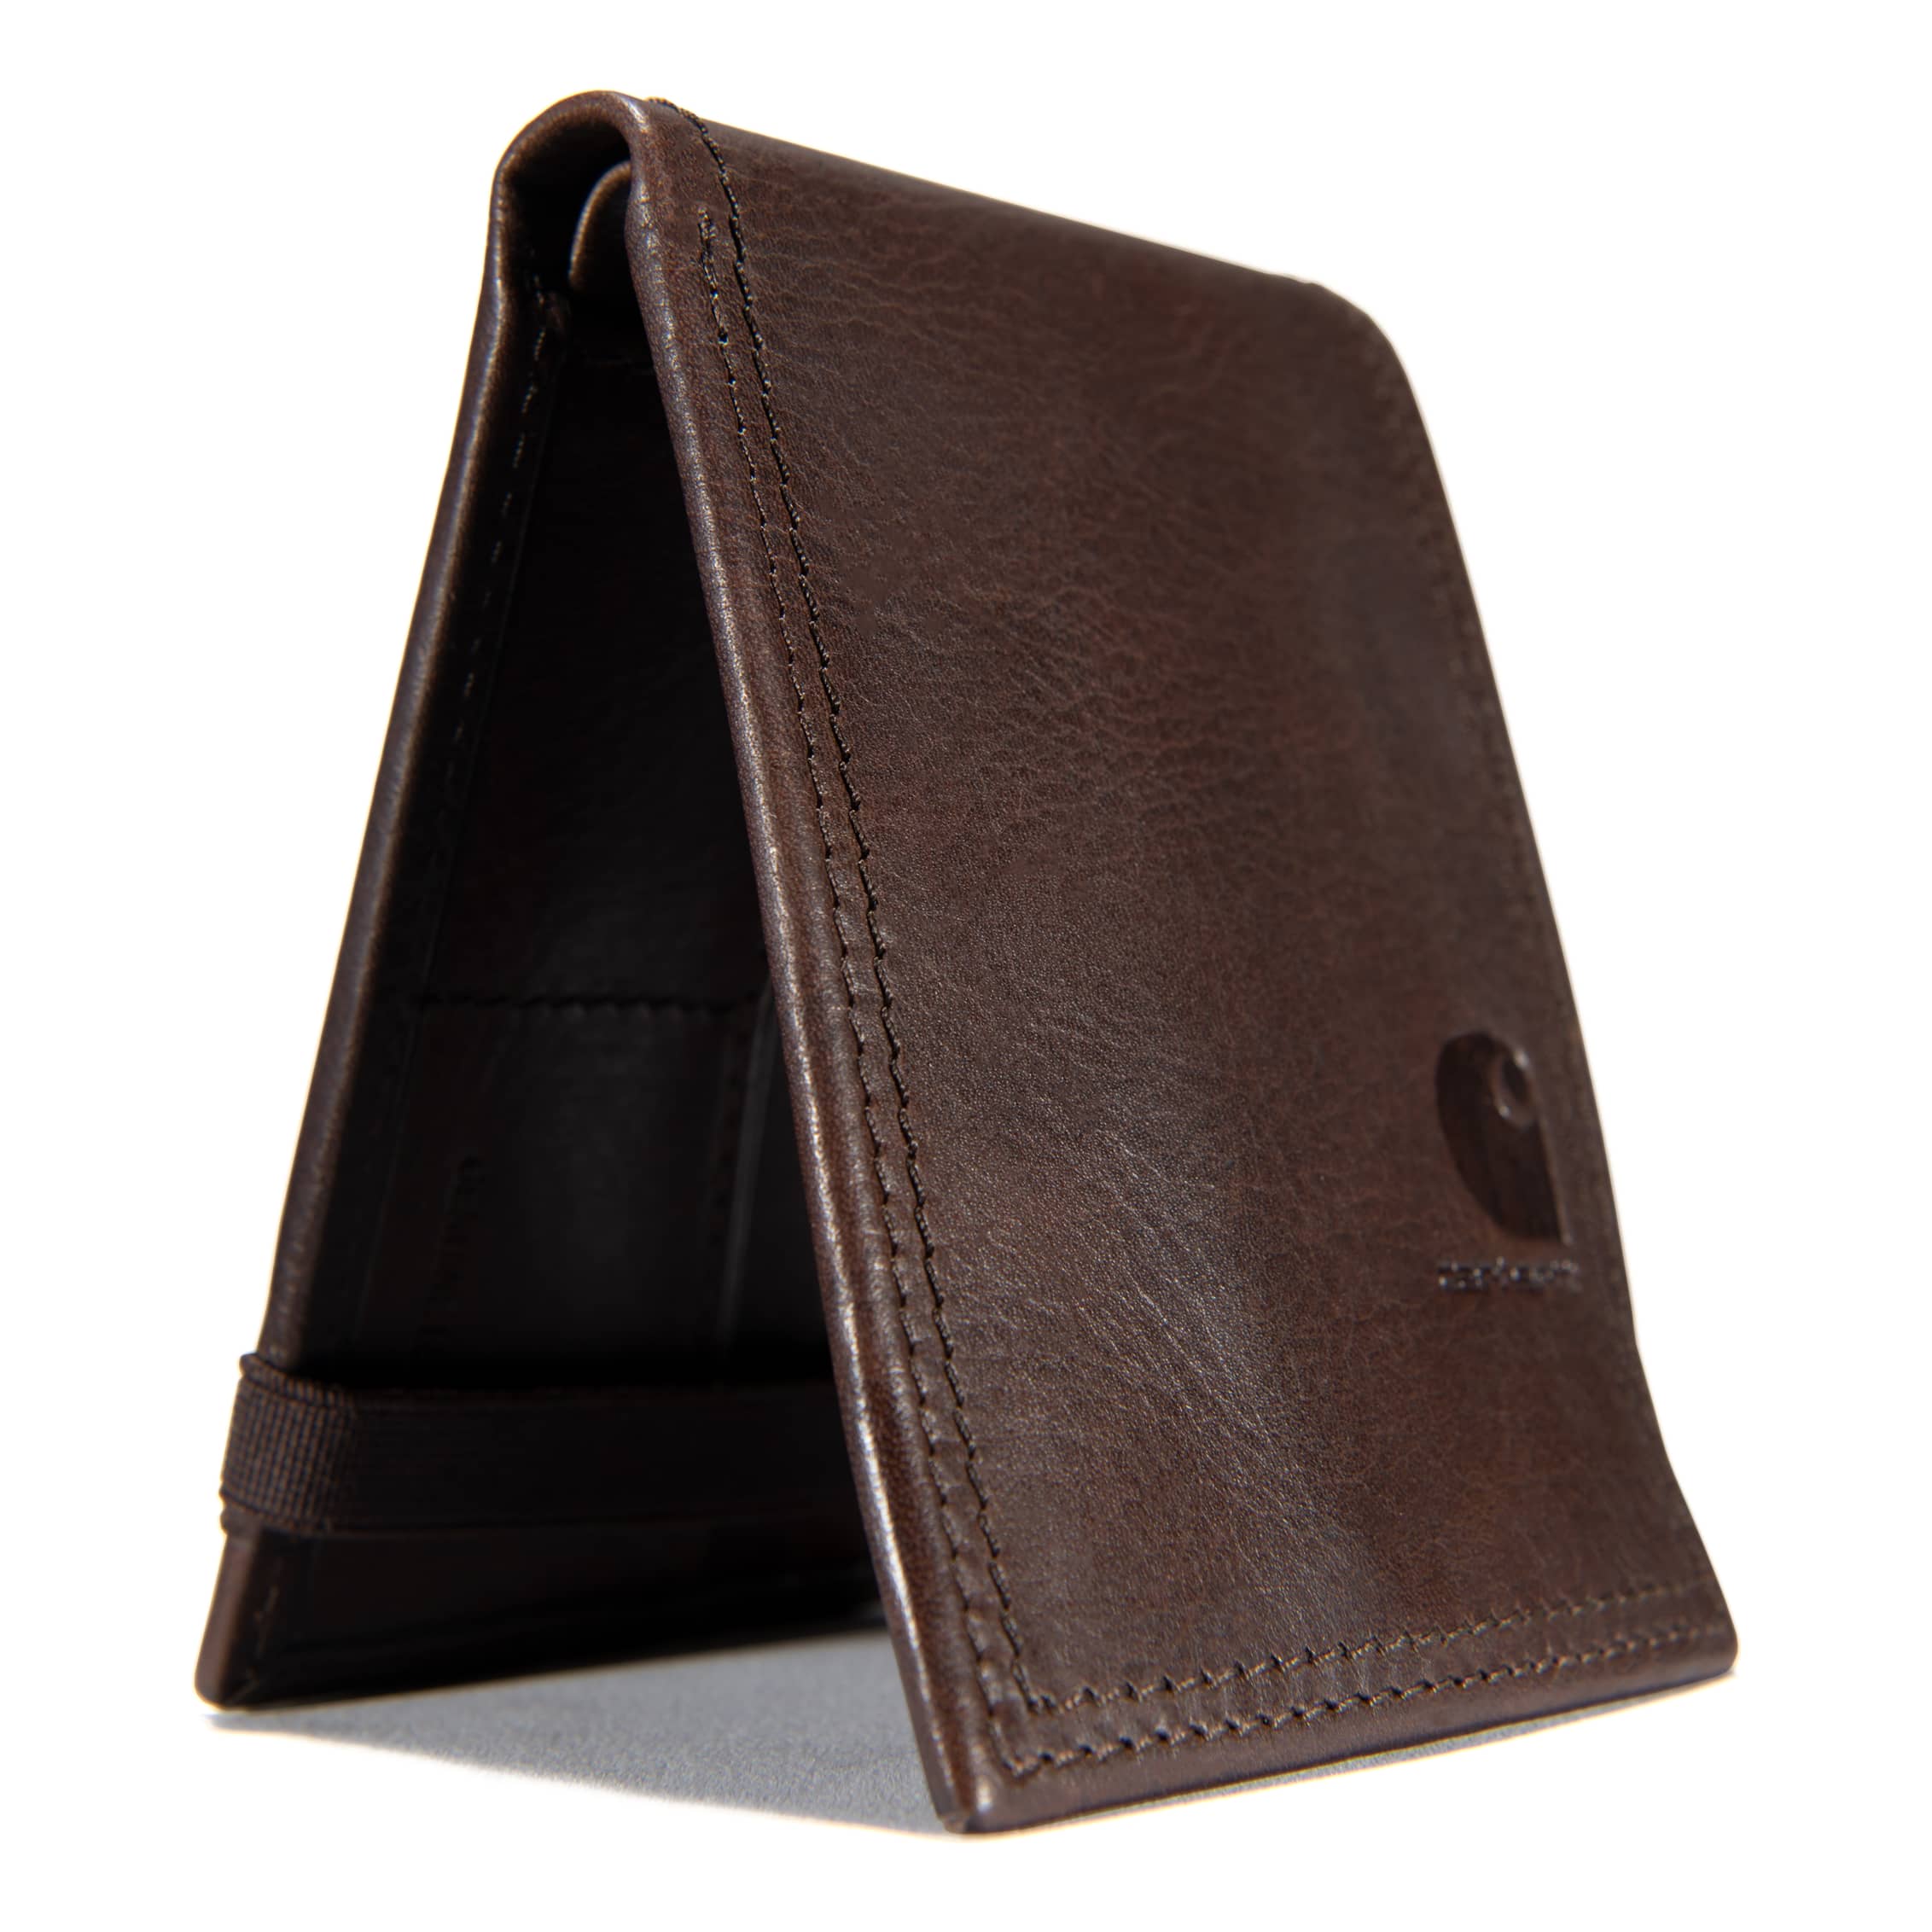 Carhartt® Classic Stitched Front Pocket Wallet